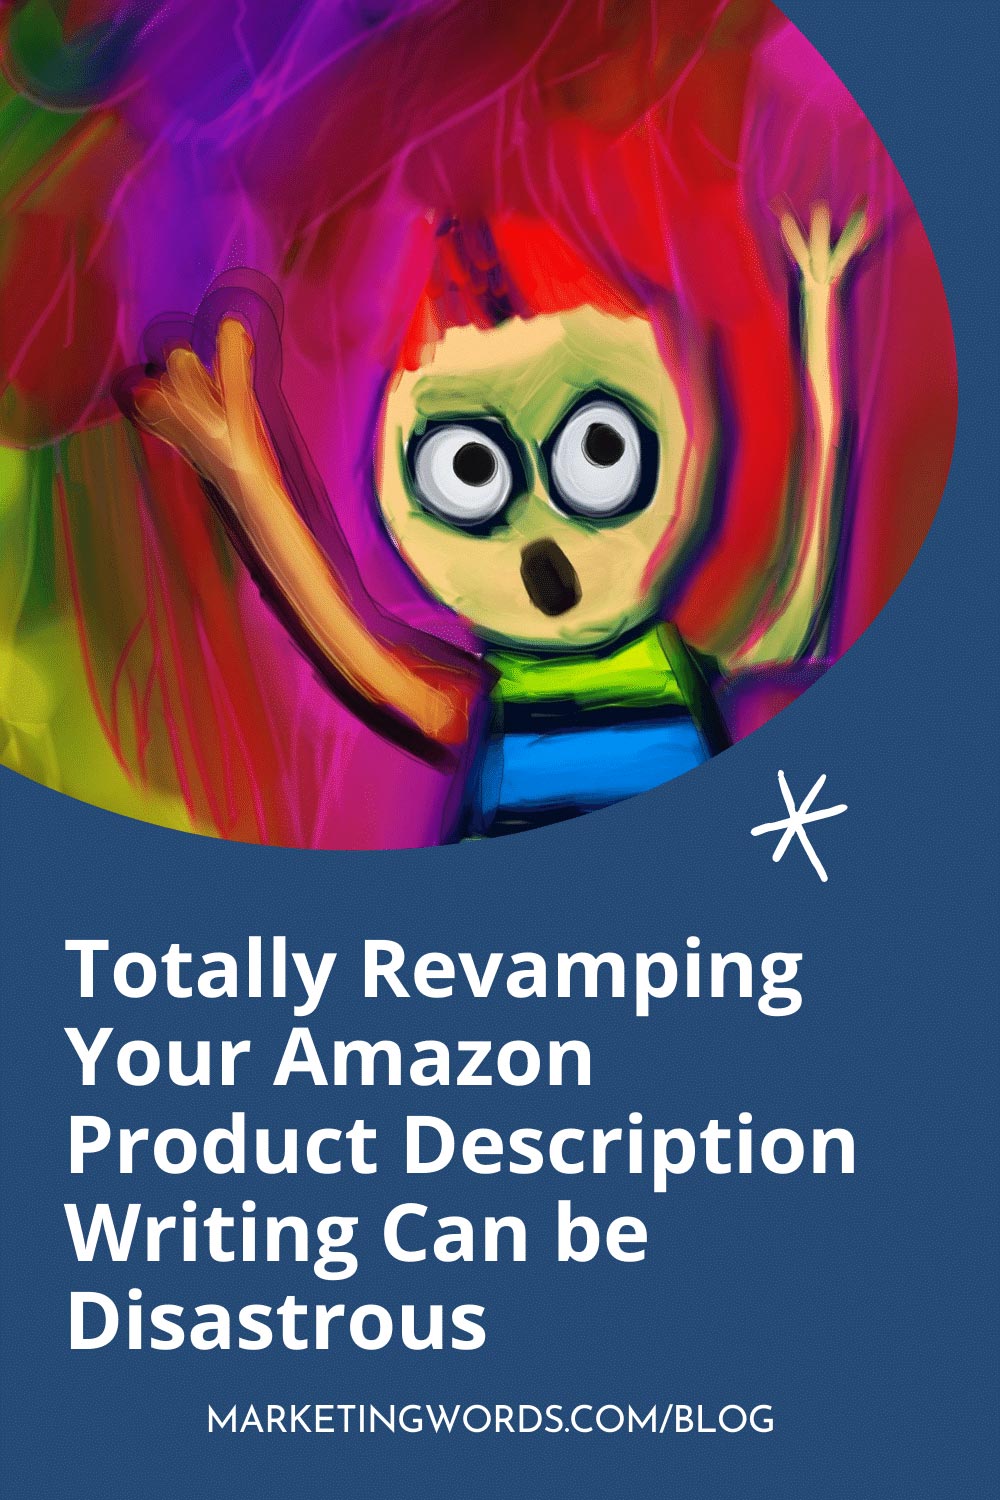 Totally Revamping Your Amazon Product Description Writing Can be Disastrous